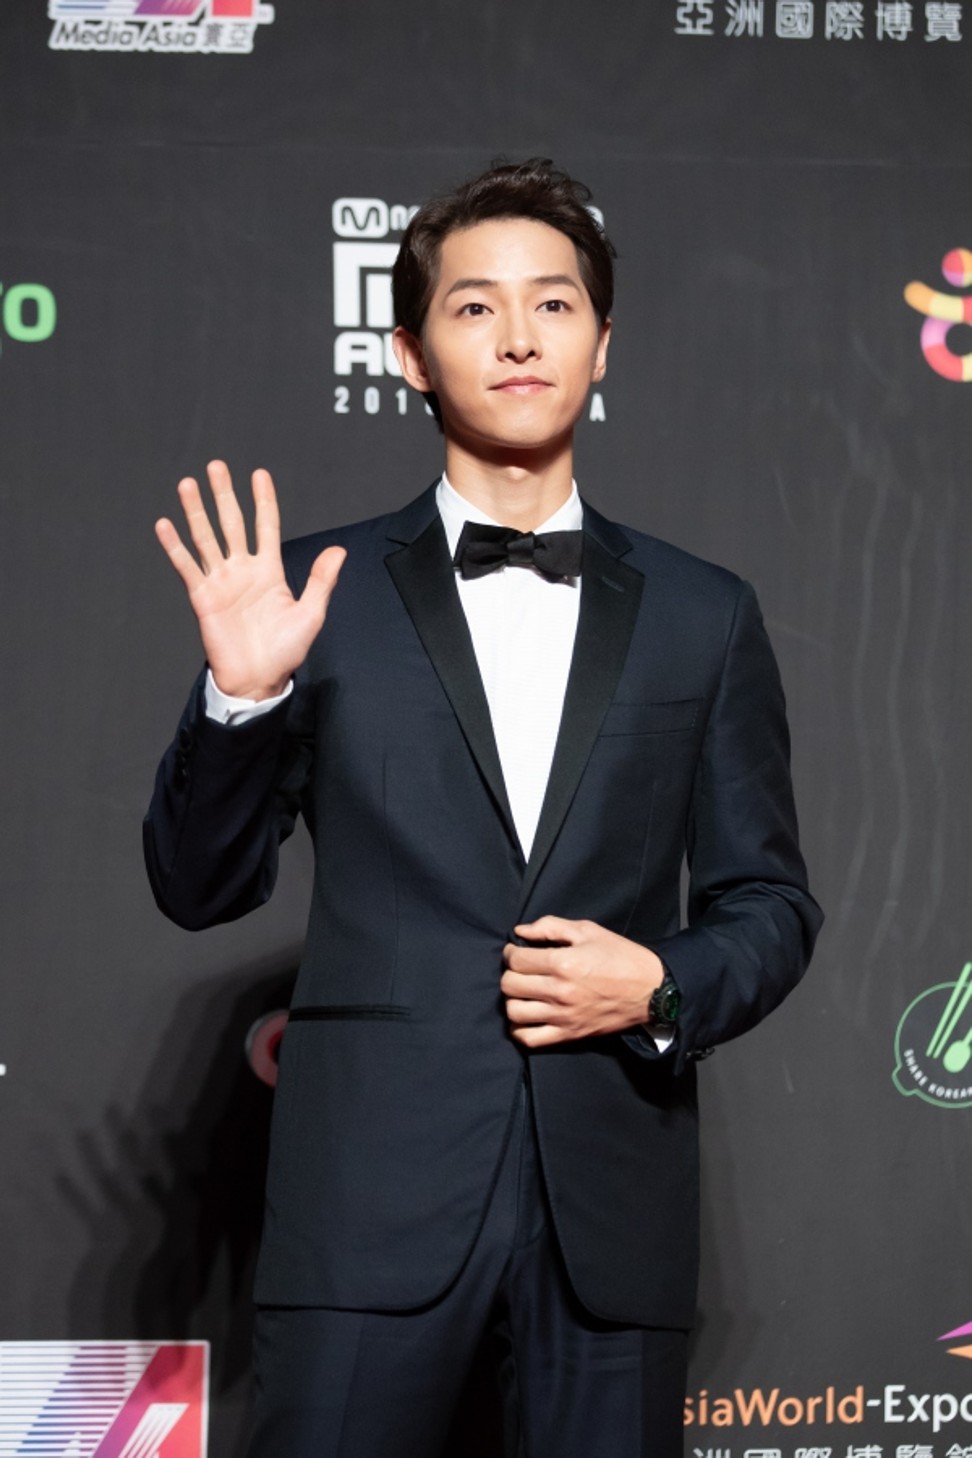 Actor and master of ceremonies Song Joong-ki